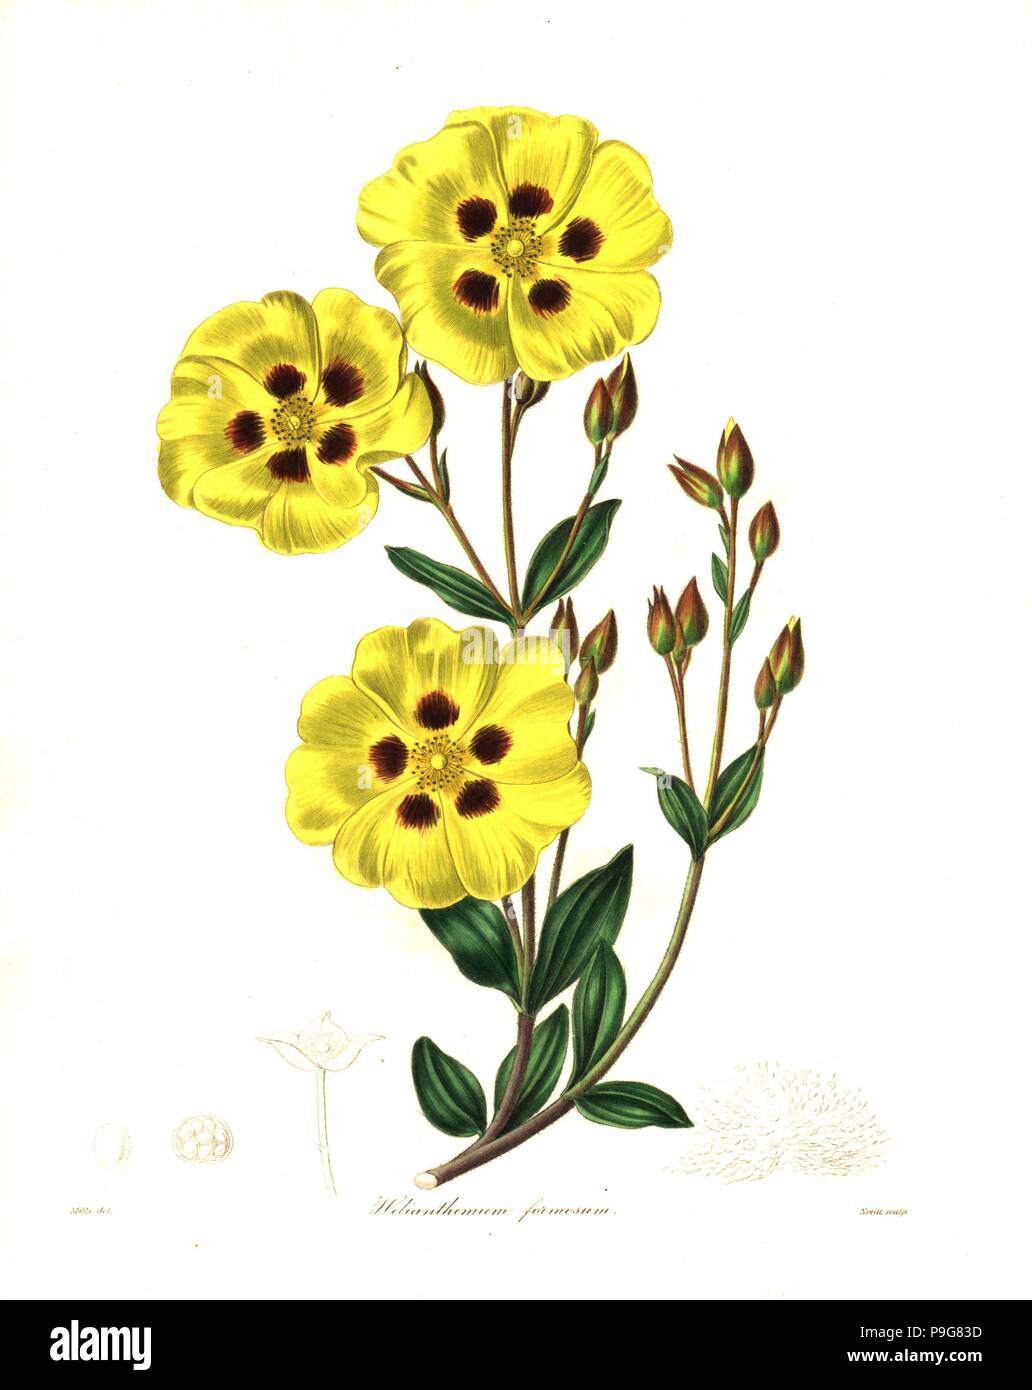 Rockrose, Halimium lasianthum subsp. formosum (Beautiful helianthemum, Helianthemum formosum). Handcoloured copperplate engraving by S. Nevitt after a botanical illustration by Mills from Benjamin Maund and the Rev. John Stevens Henslow's The Botanist, London, 1836. Stock Photo